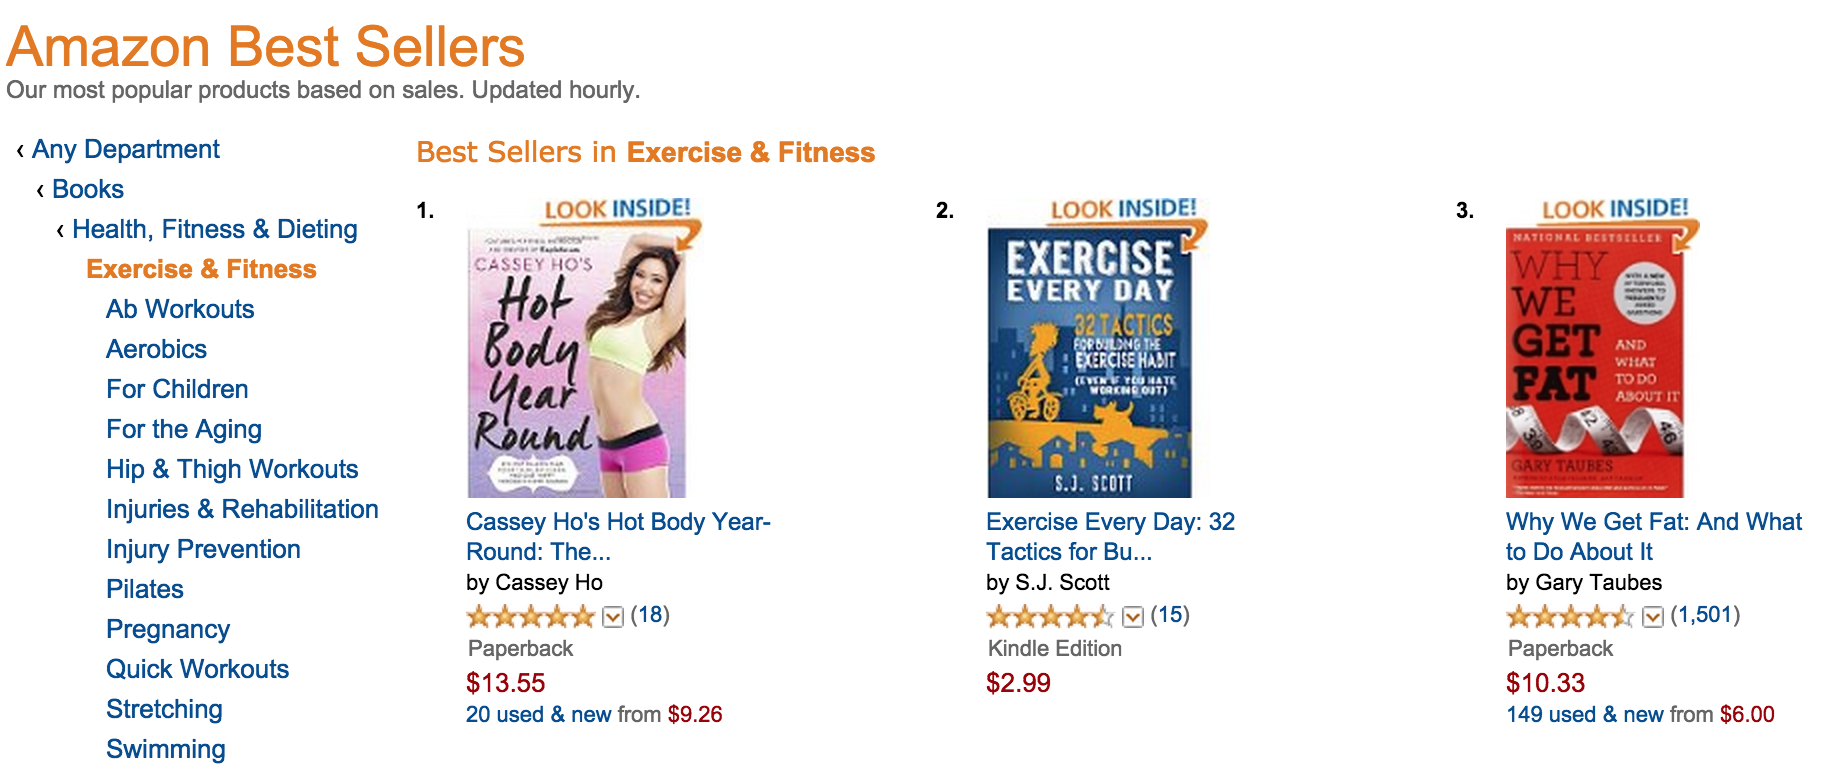 #1 in exercise